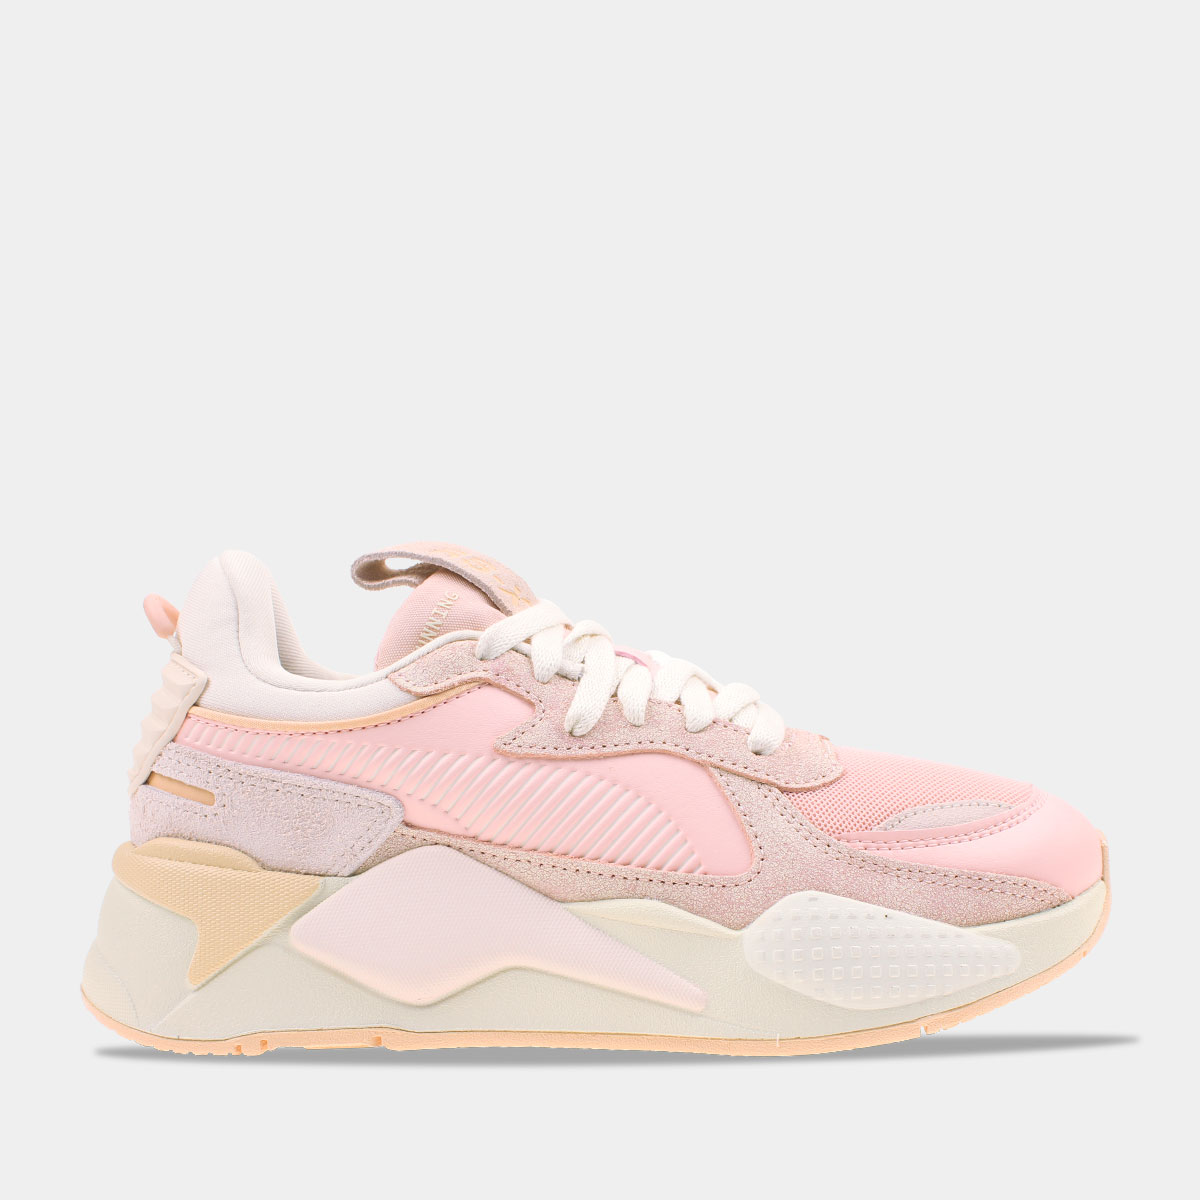 Verrassend genoeg afstand Leeds PUMA RS-X Thrifted Roze Dames | SNEAKERS